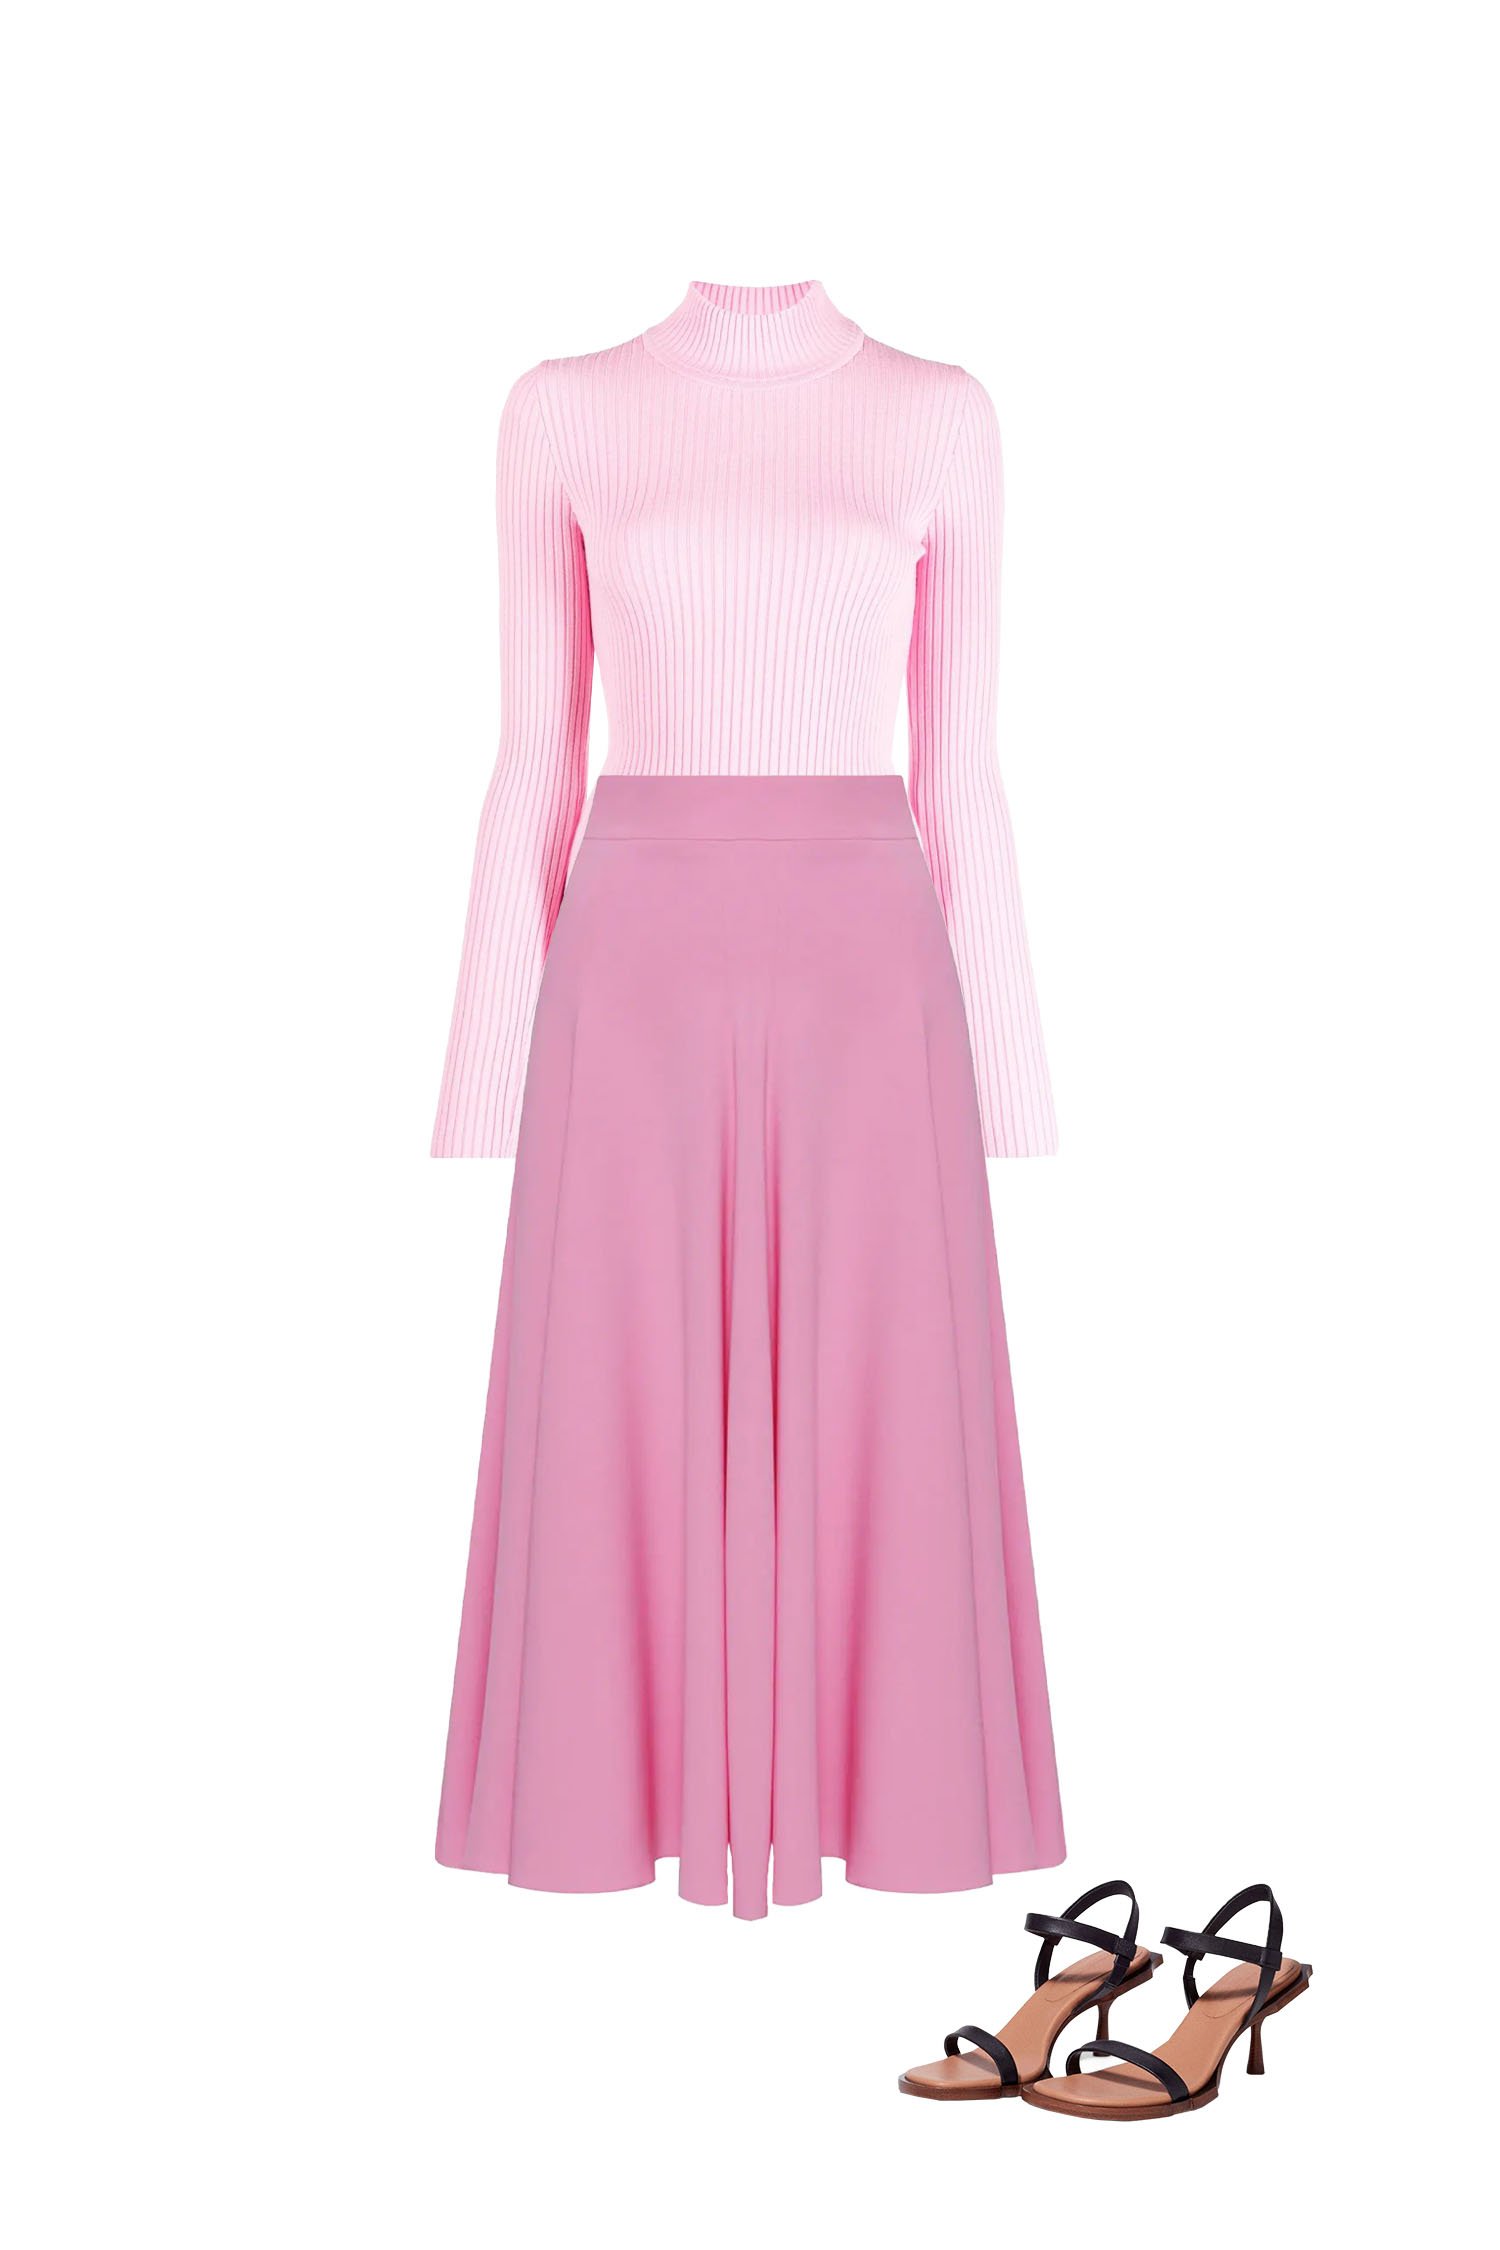 Pink Ribbed Mock Neck Top Bubblegum with Pink Circle Skirt Outfit